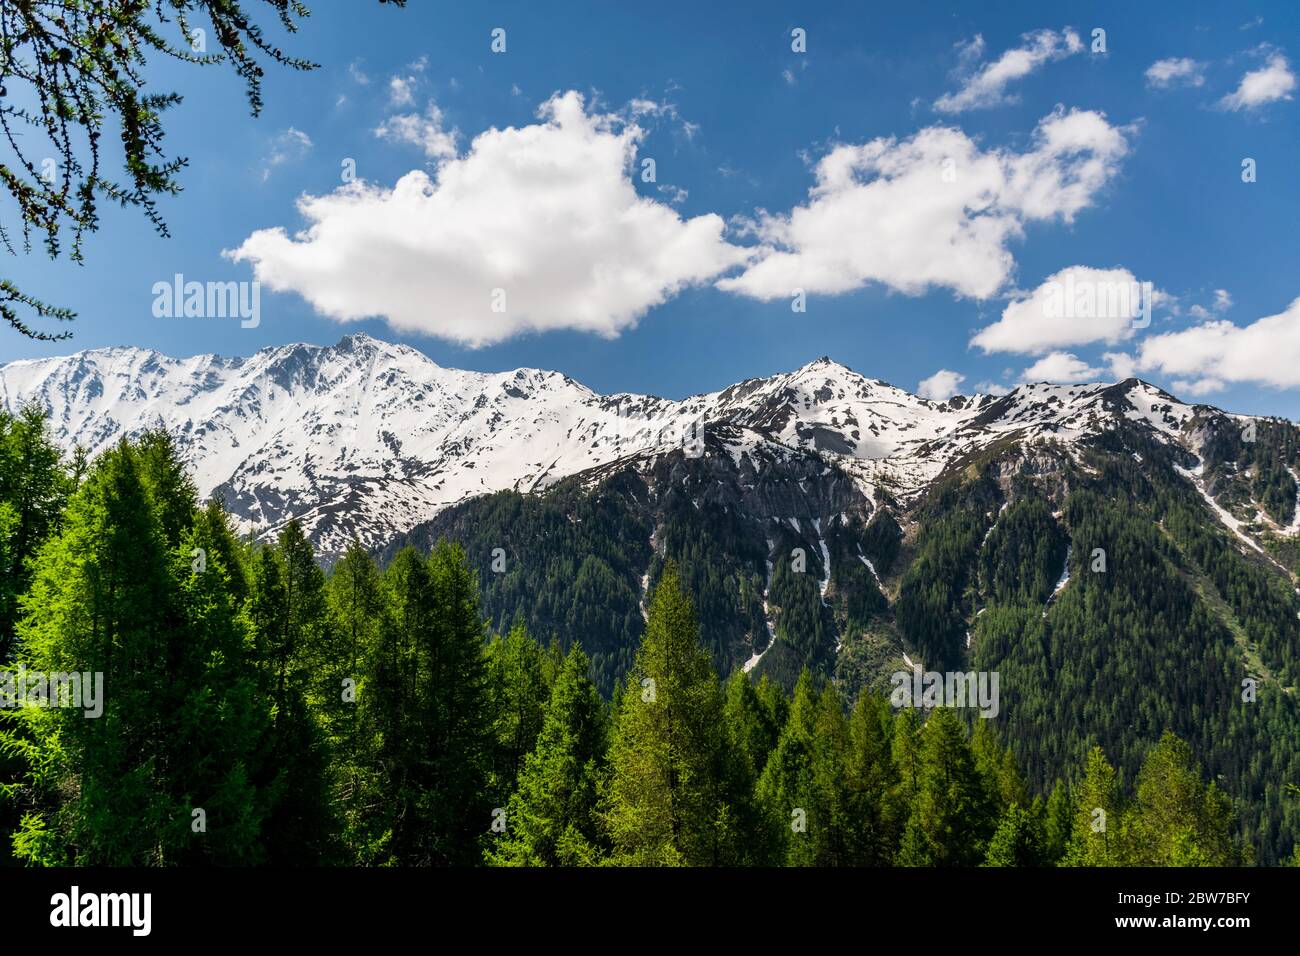 French iconic mountain landscape in the Alps Stock Photo